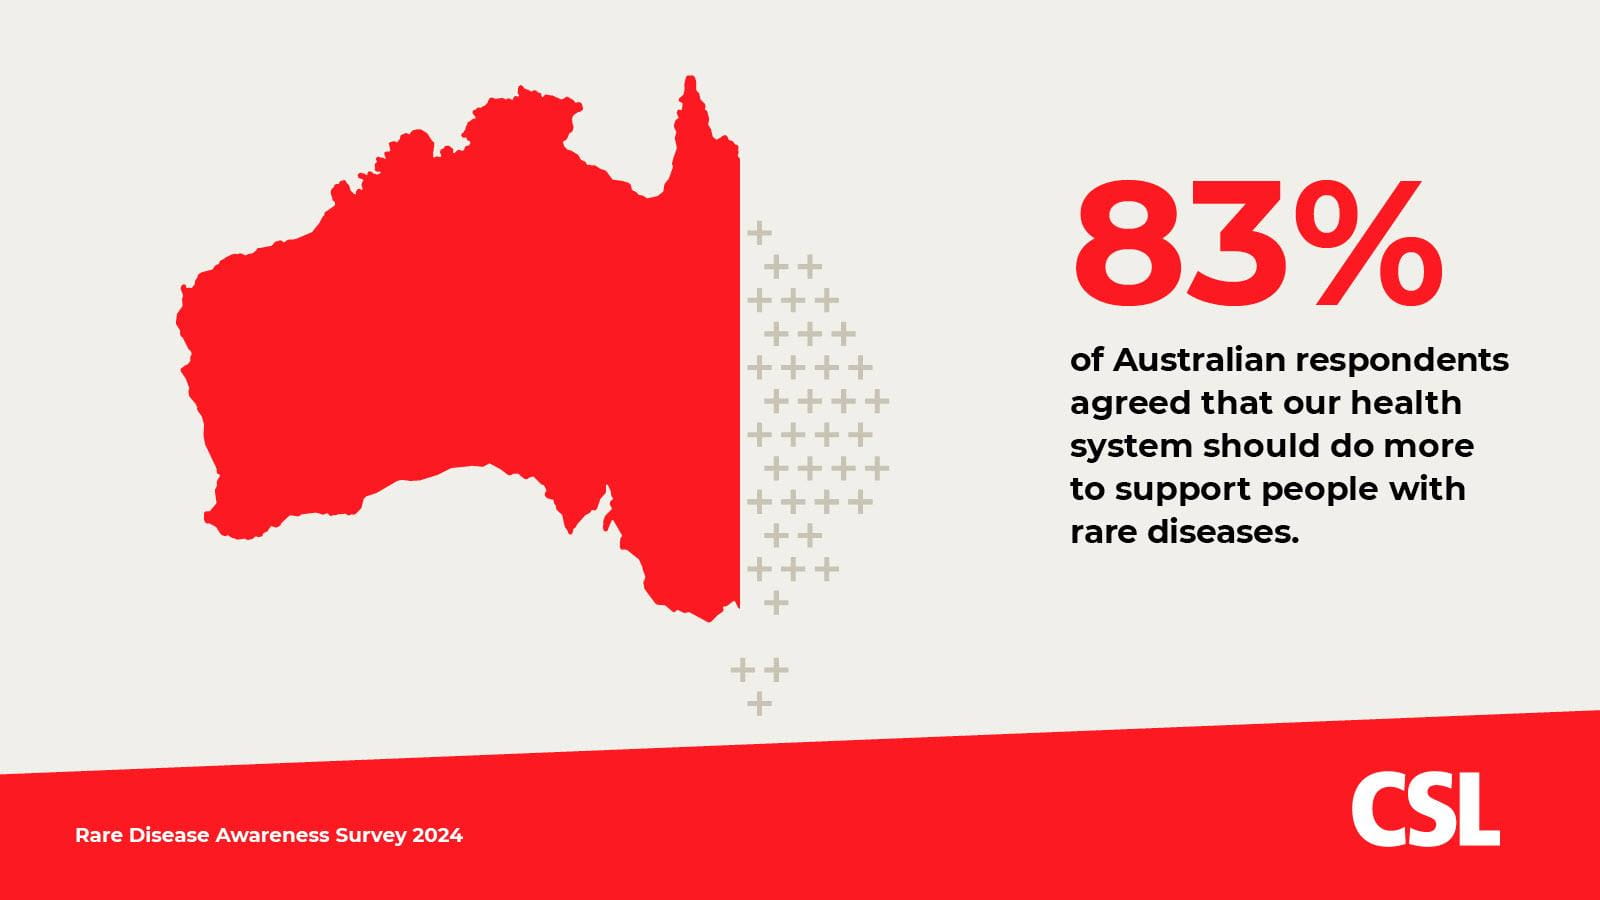 83% of Australian respondents said the health care system should do more to support people who have rare diseases.